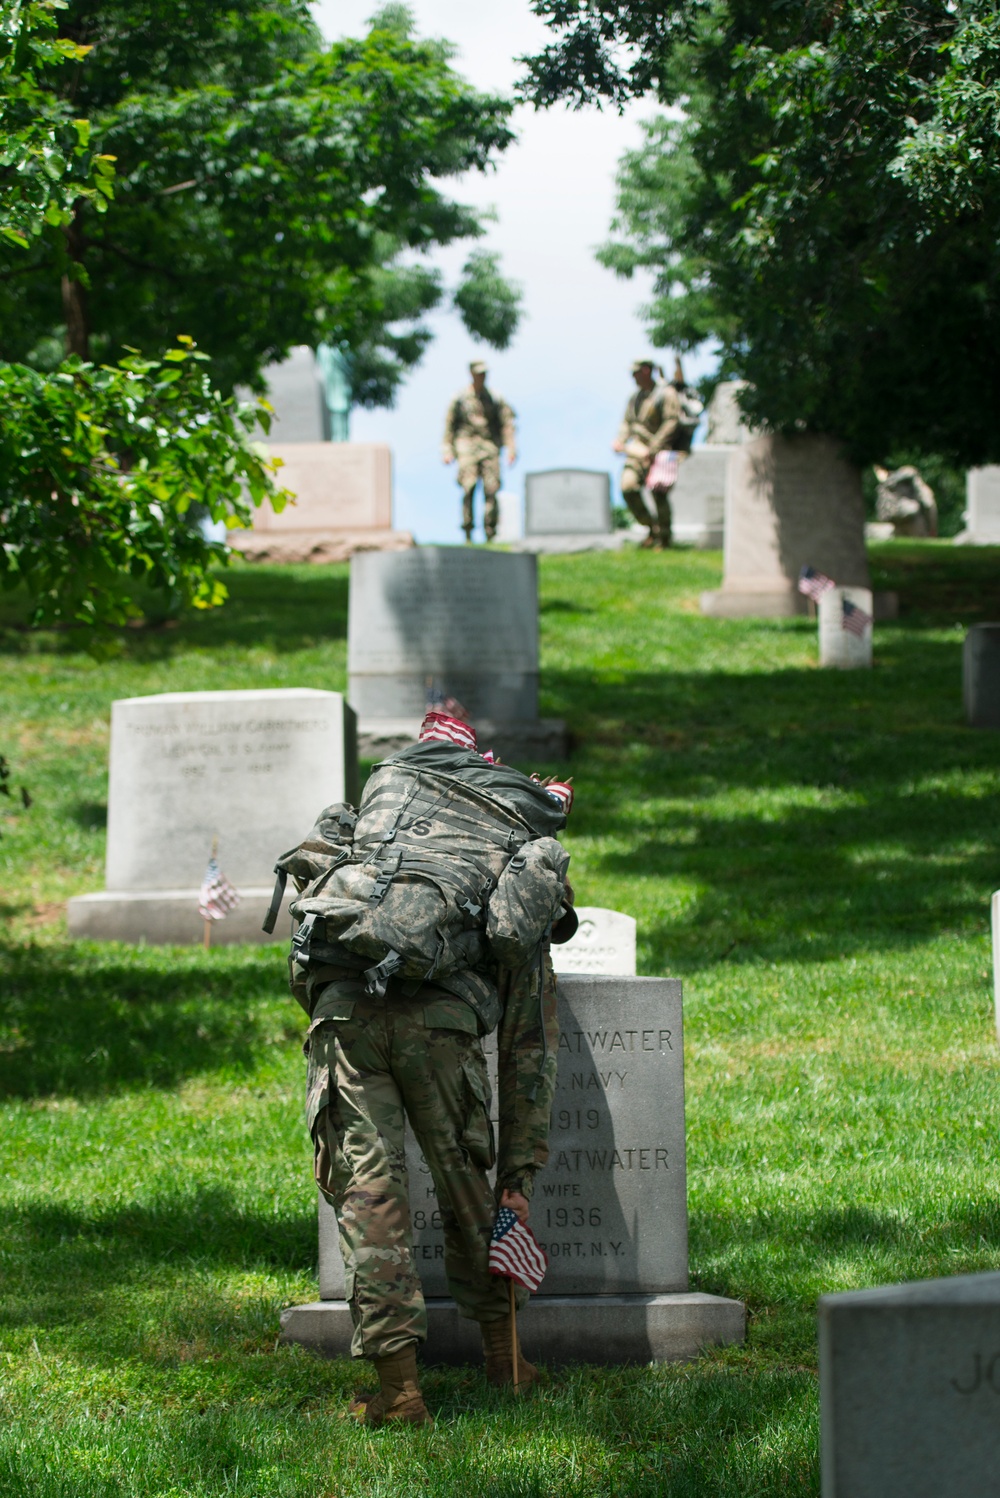 Members of the 3d U.S. Infantry Regiment (The Old Guard) Participte in Flags-In - May 25, 2017